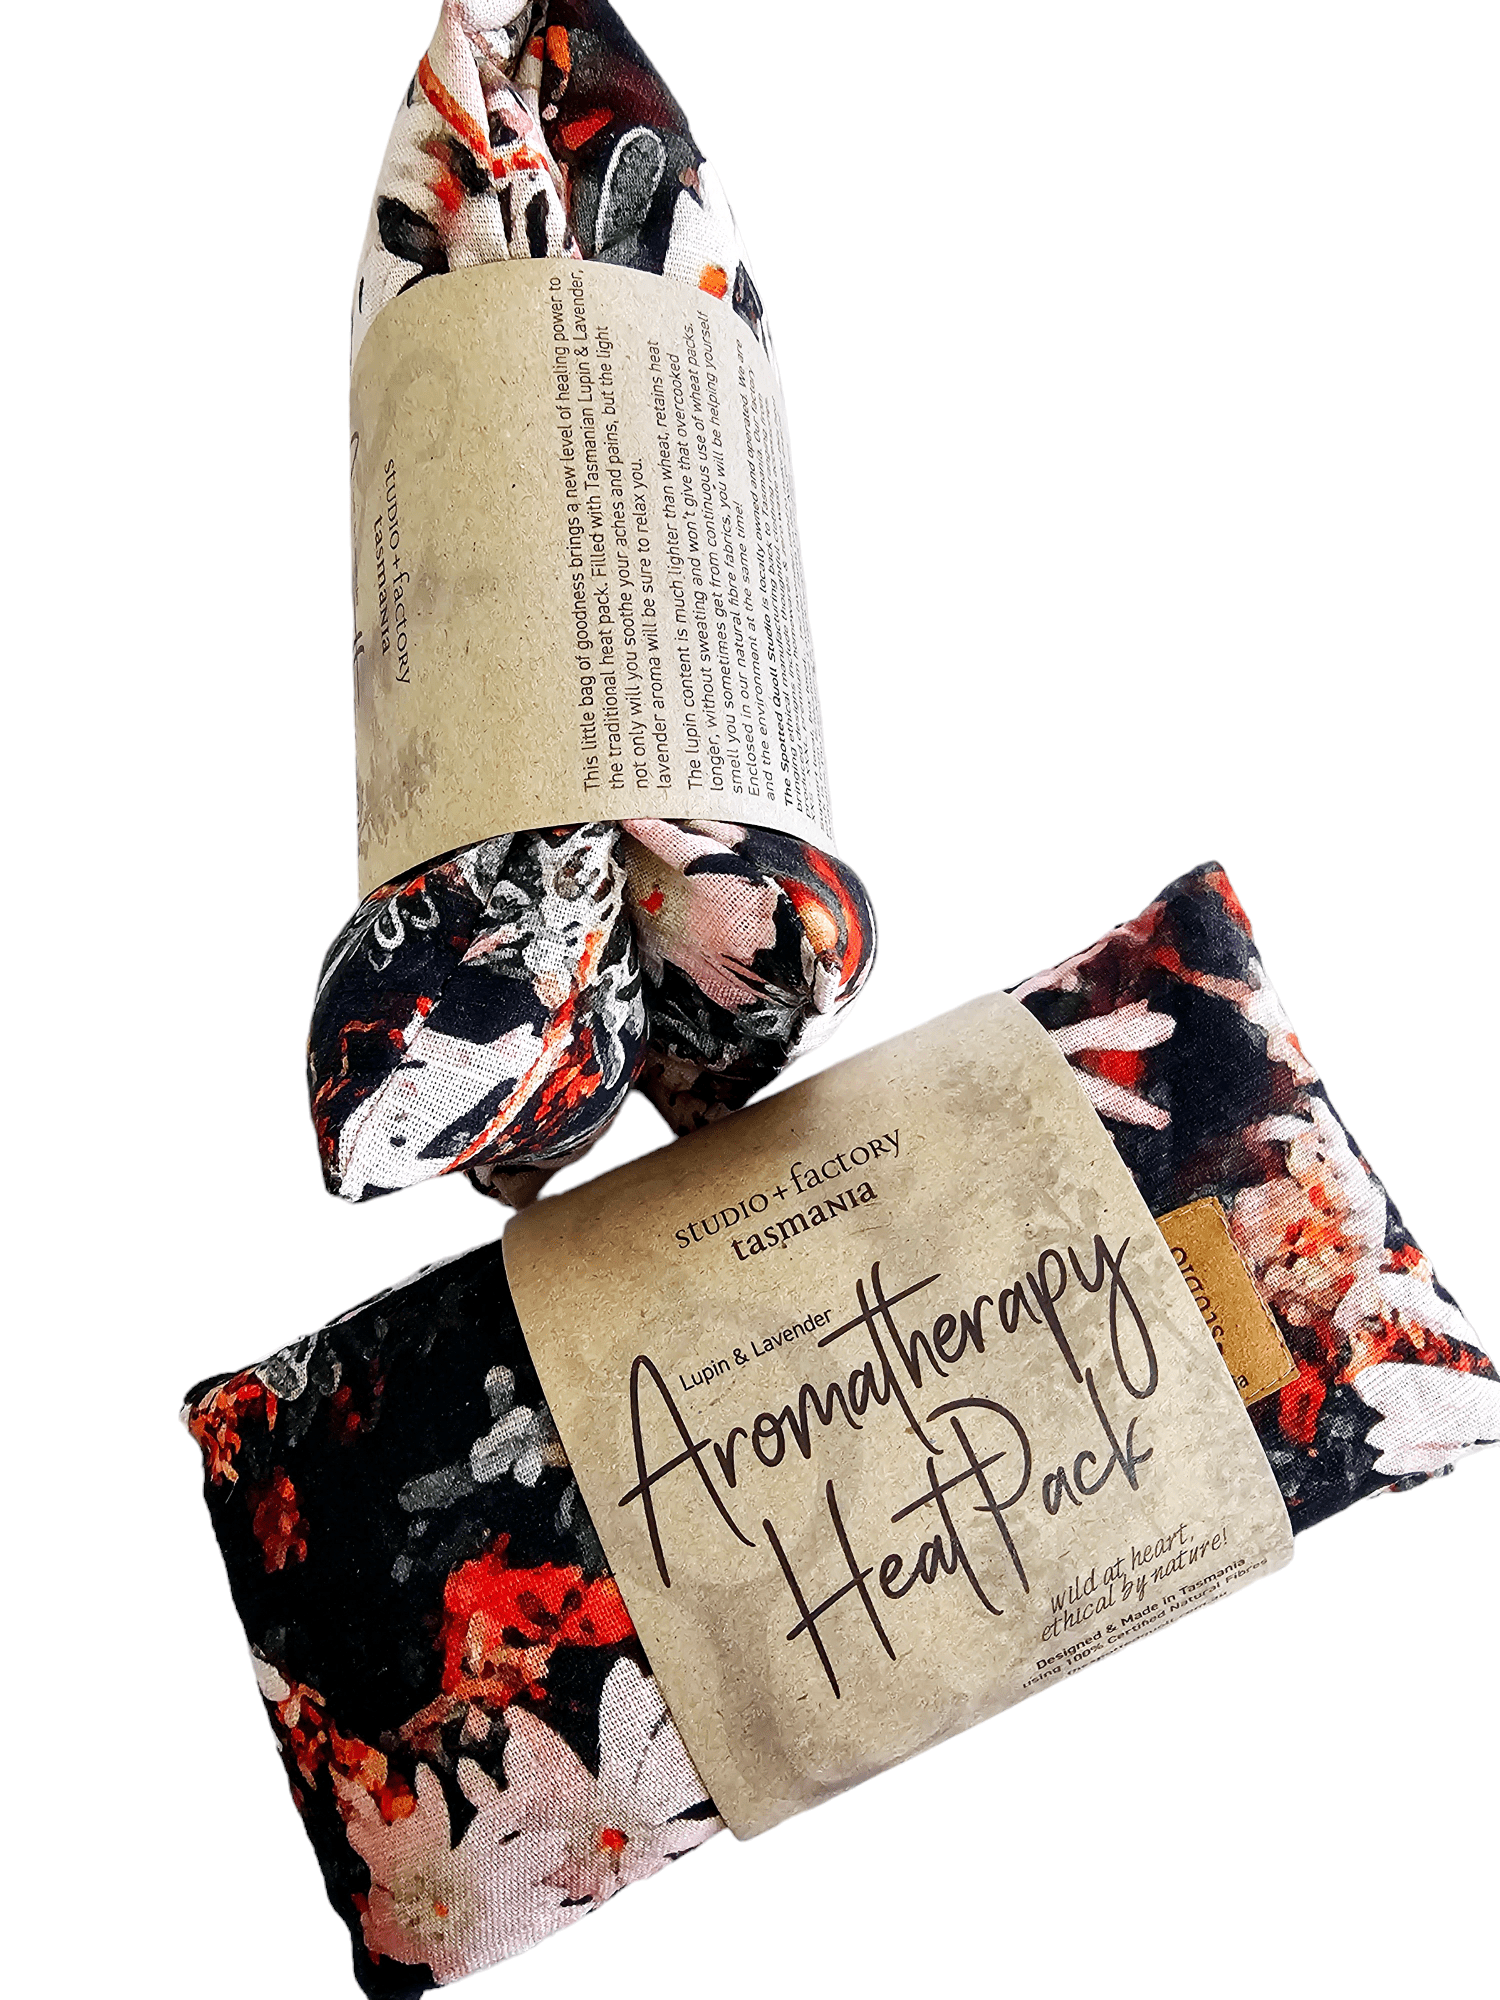 Aromatherapy Heat/Cold pack - Lupin & Lavender Heating Pads The Spotted Quoll Long Native Pigface 